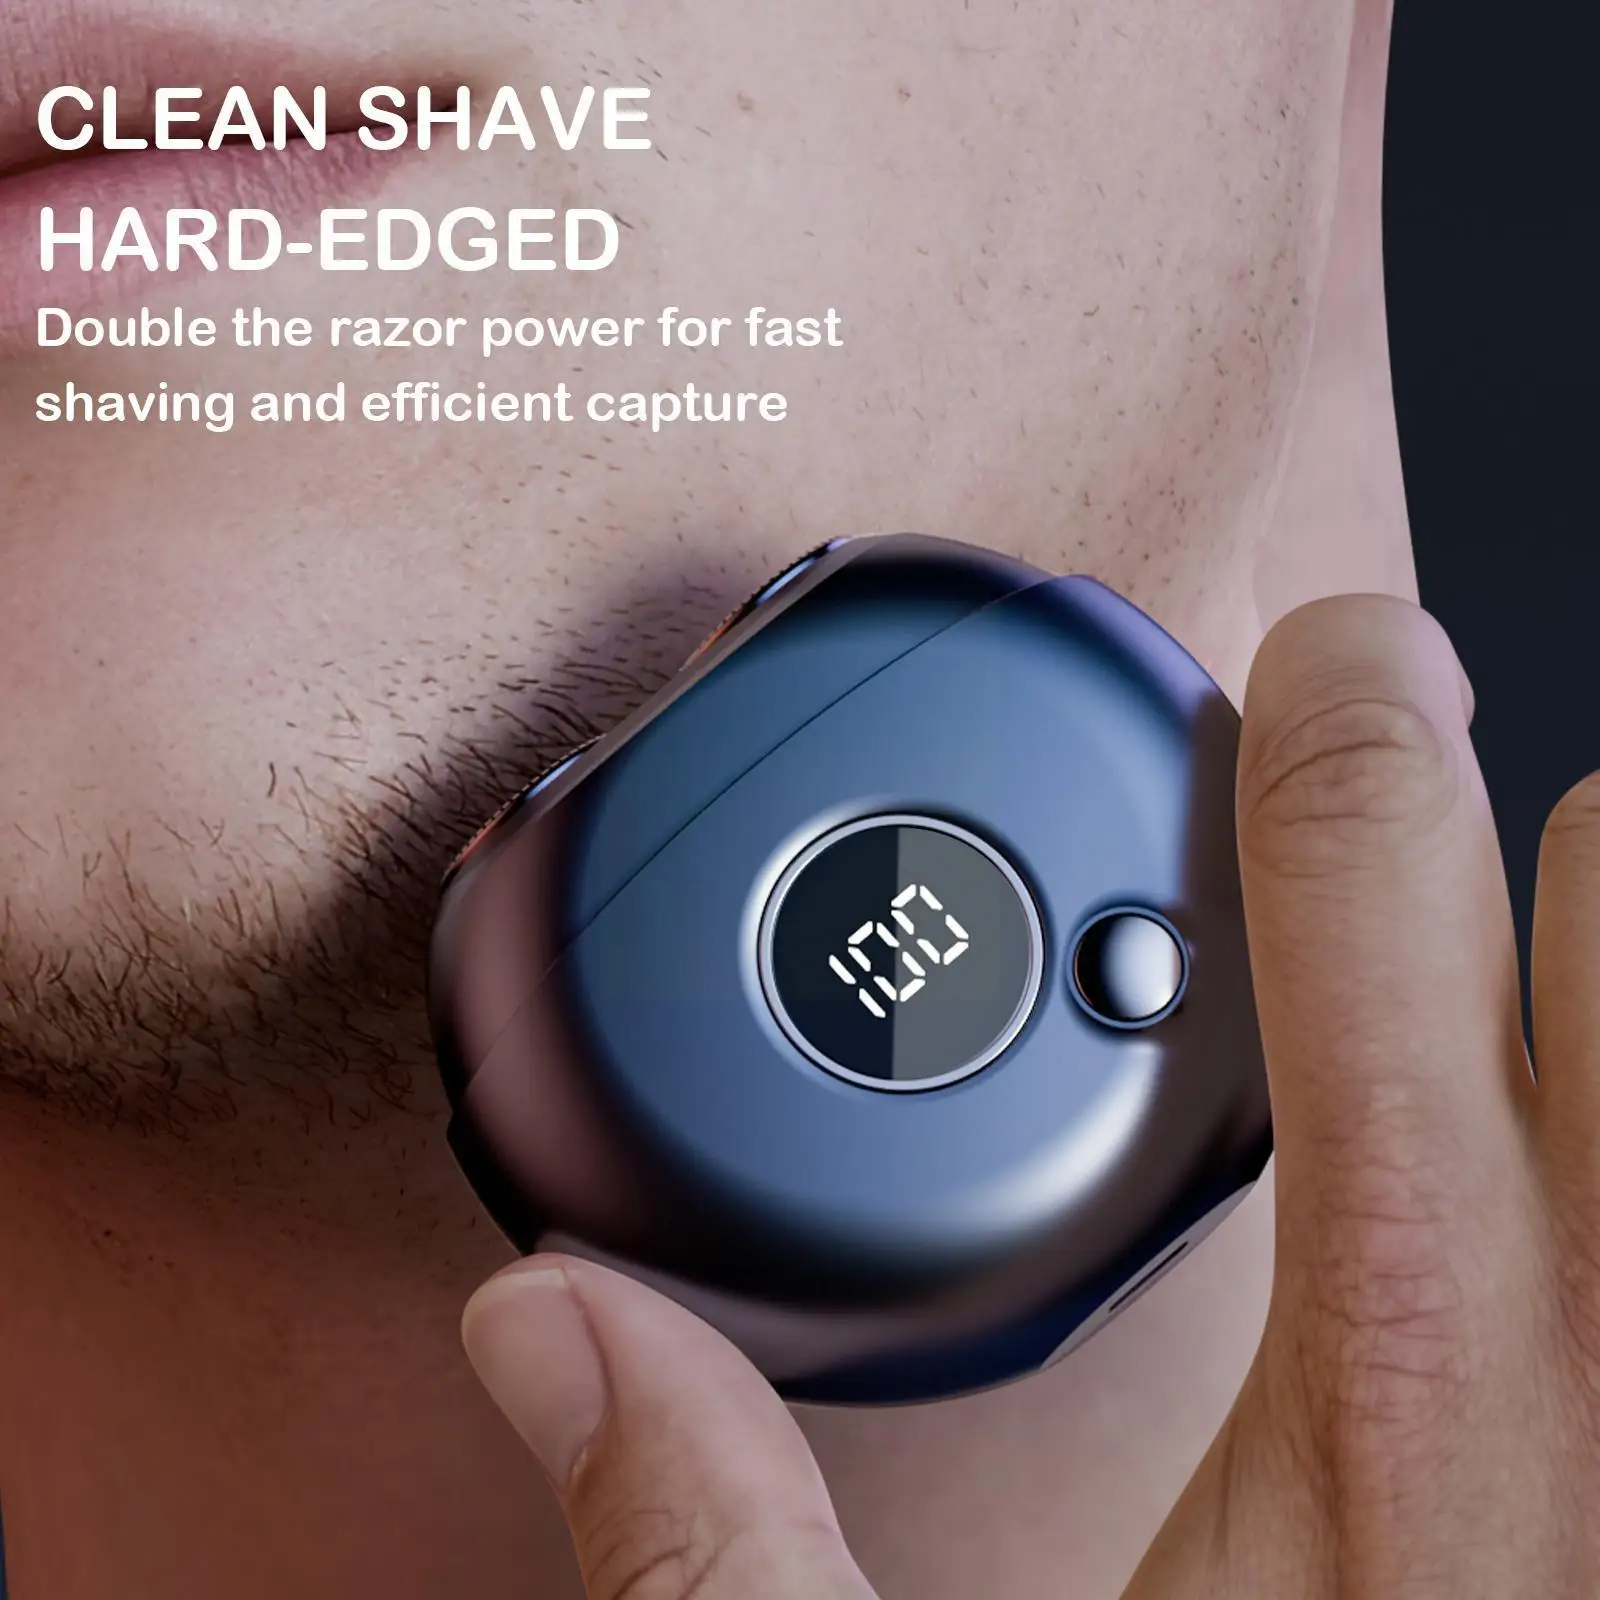 

Mini Razor Shaver Rechargeable Electric Fly Saucer Razor Waterproof Barber Rotary Shaver Beard Shavers For Men Tavel Trimme J3V7